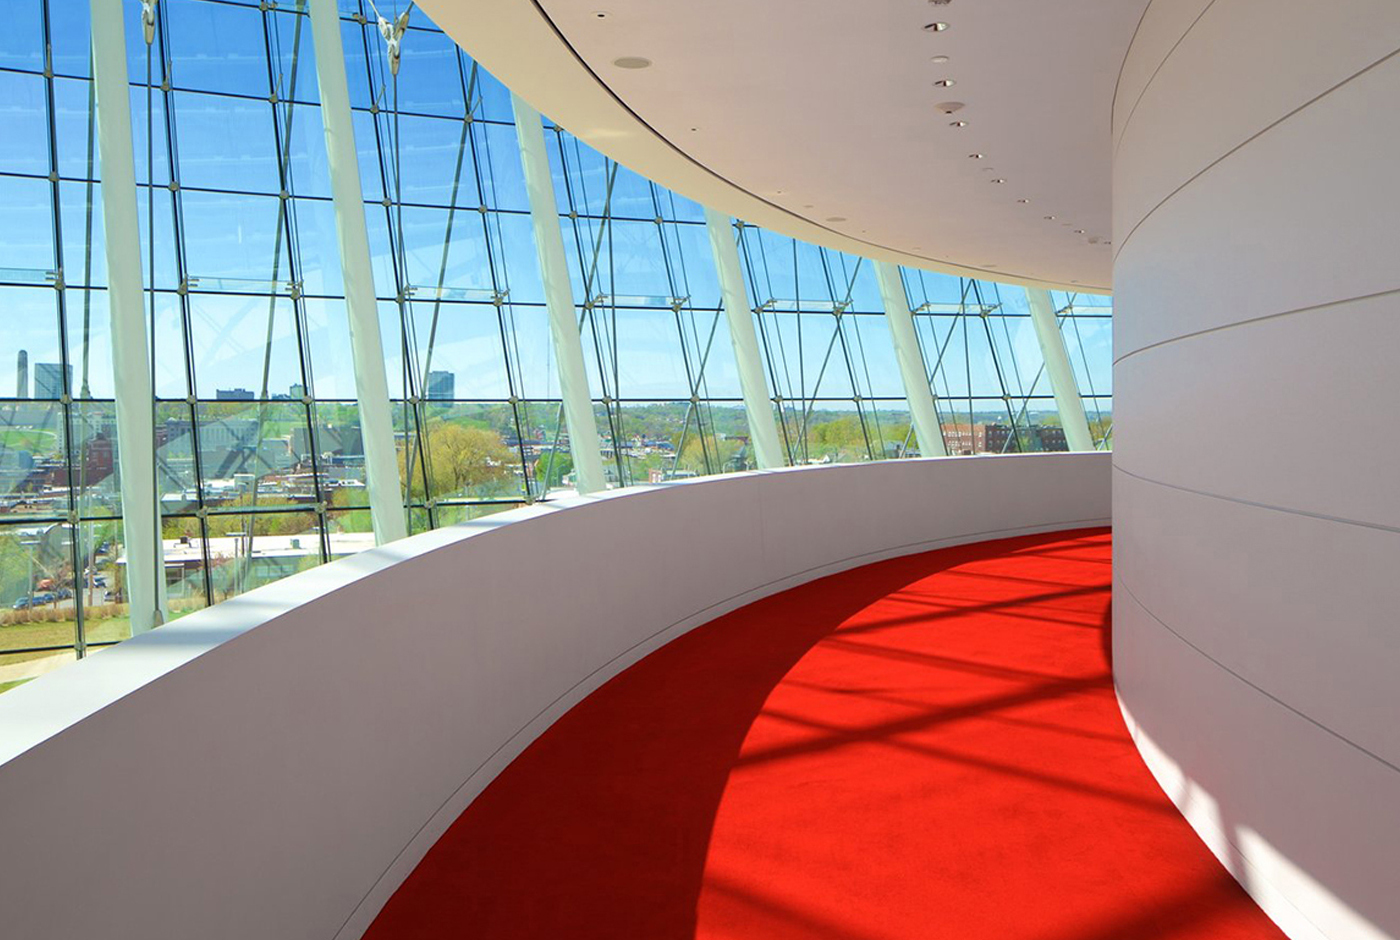 Kauffman Center for the Performing Arts | Kansas City, MO | Safdie Architects<br />2012 IESNA International Award of Merit | 2012 A/L Light & Architecture Outstanding Achievement